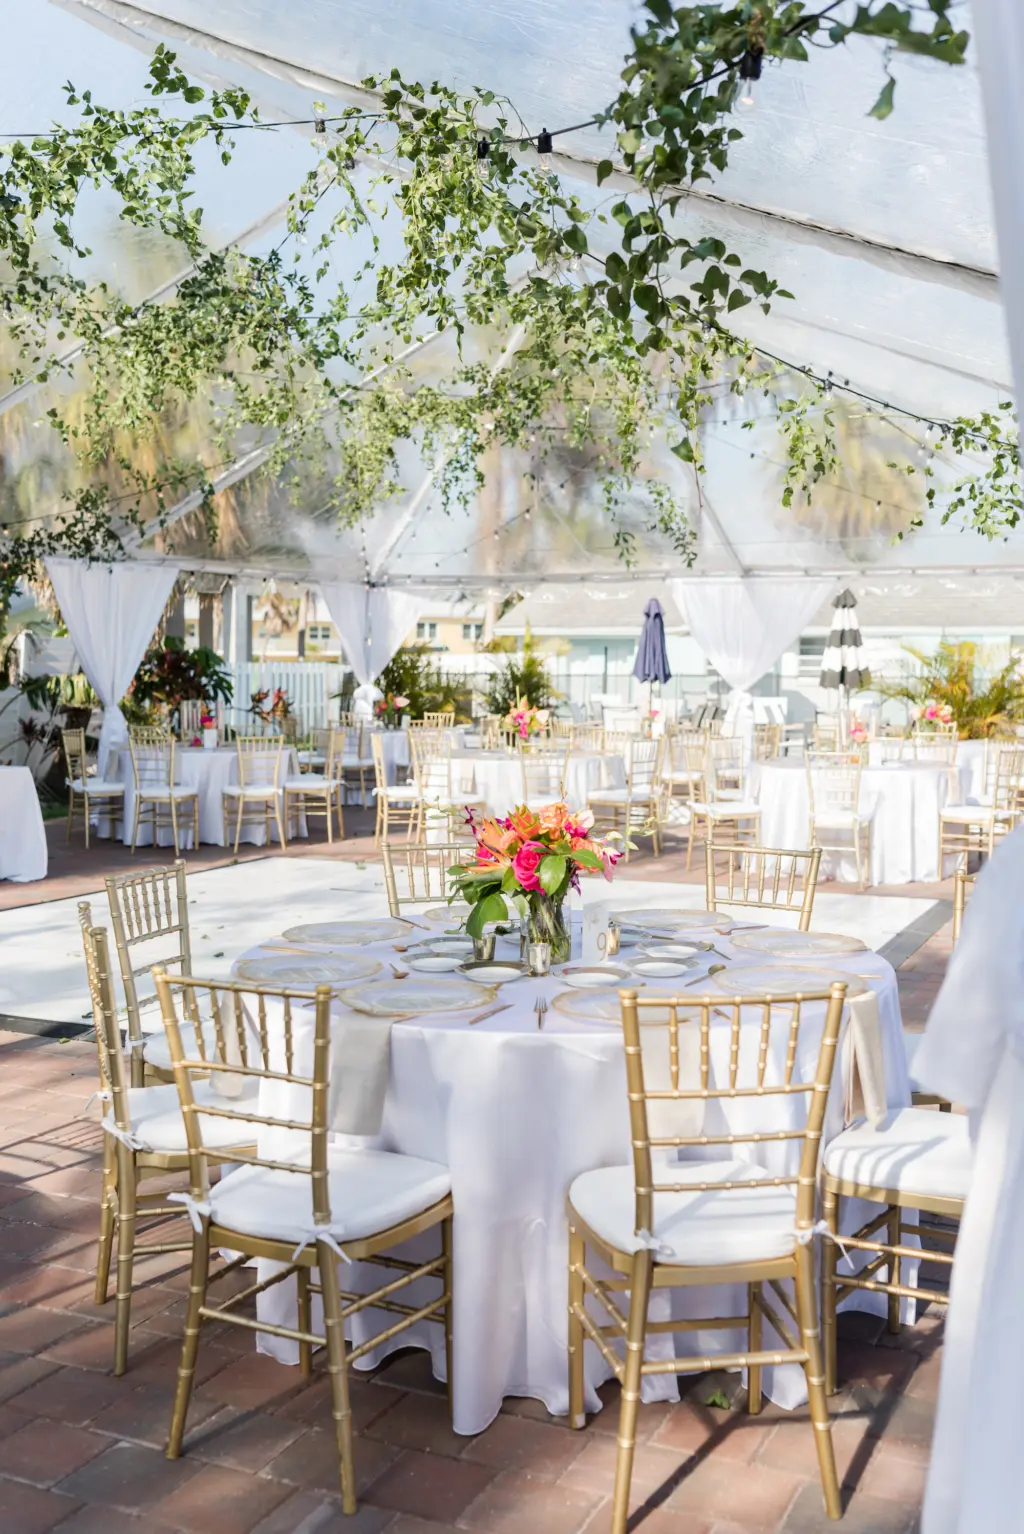 Tented Tropical Beach Wedding Reception Ideas with Greenery and Pops of Color | Gold Chiavari Chairs with White Linen Rounds | Wedding Planner MDP Events Tampa Florida